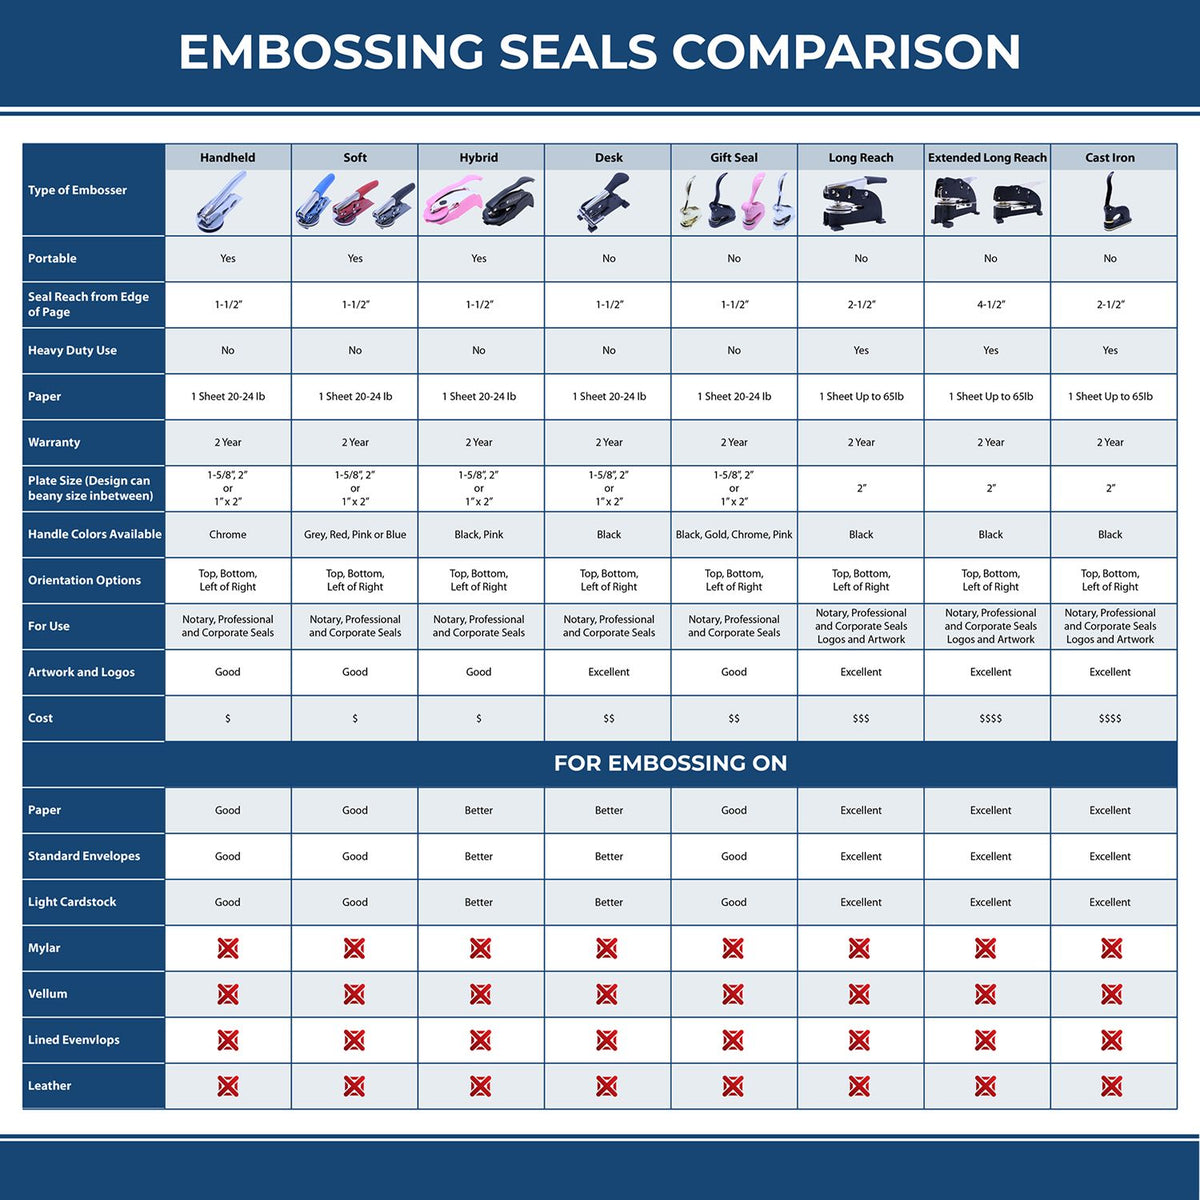 A comparison chart for the different types of mount models available for the Long Reach Idaho Land Surveyor Seal.